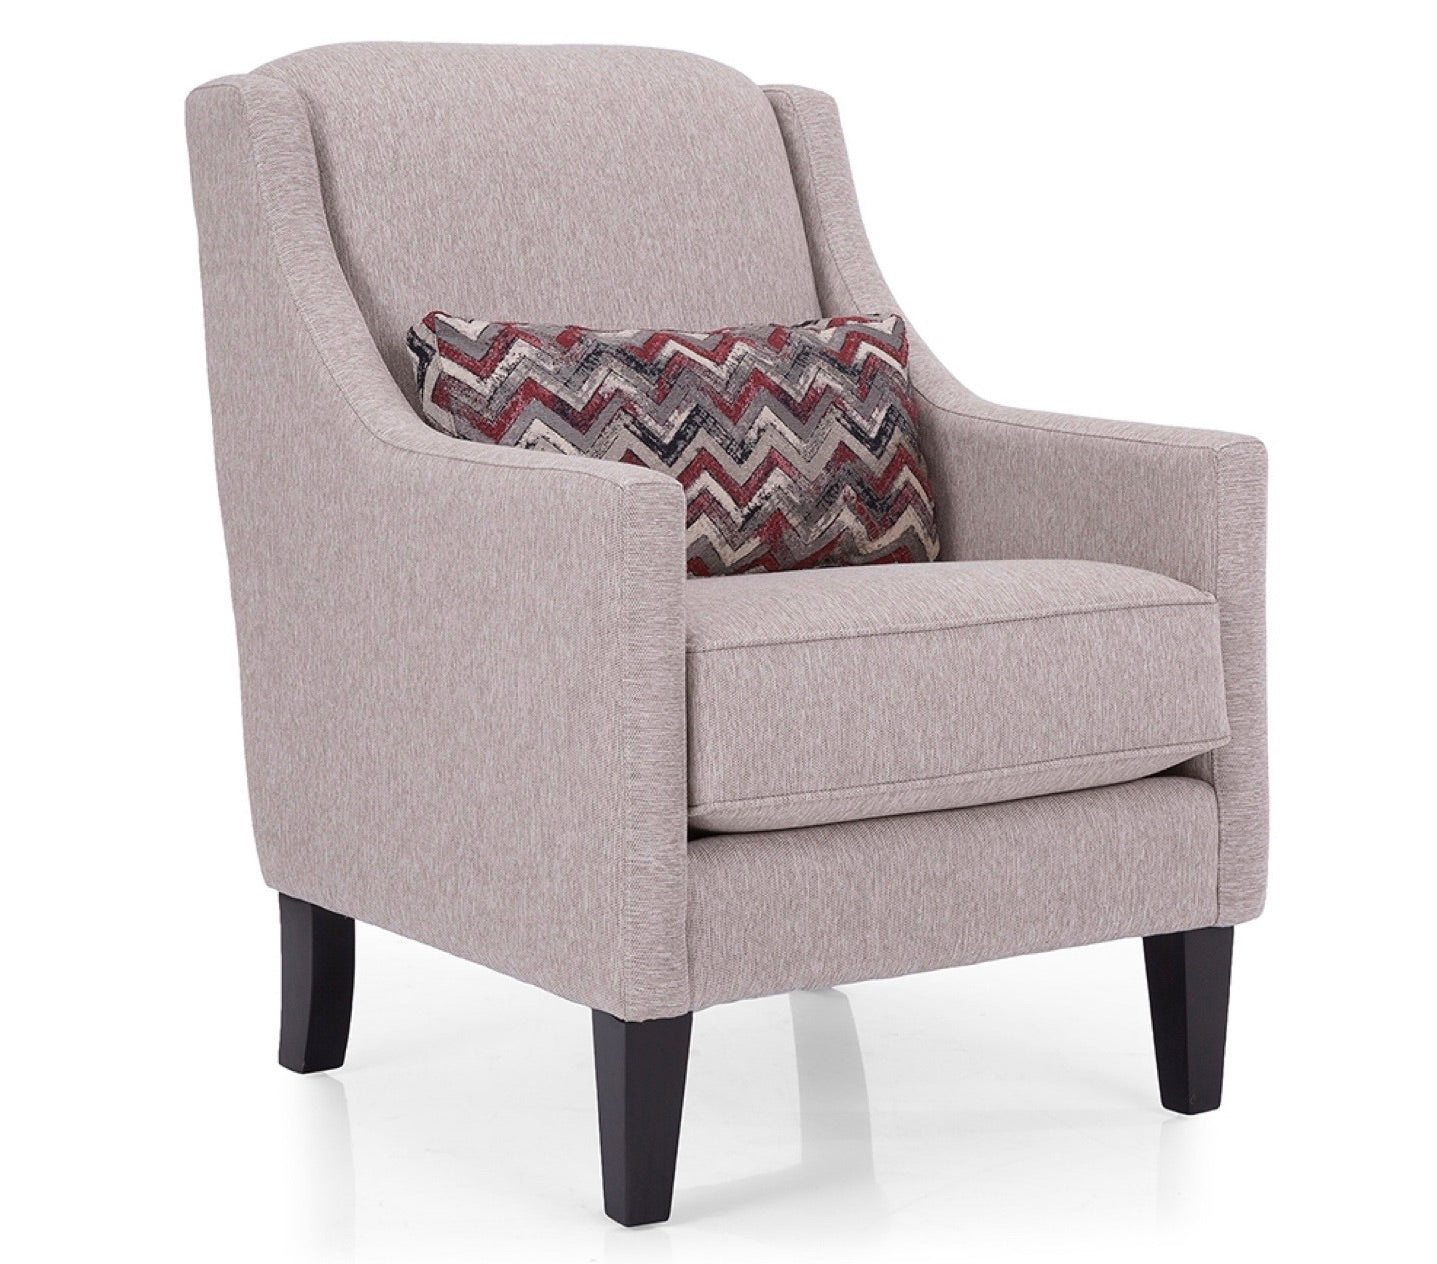 7606 - Accent Chair